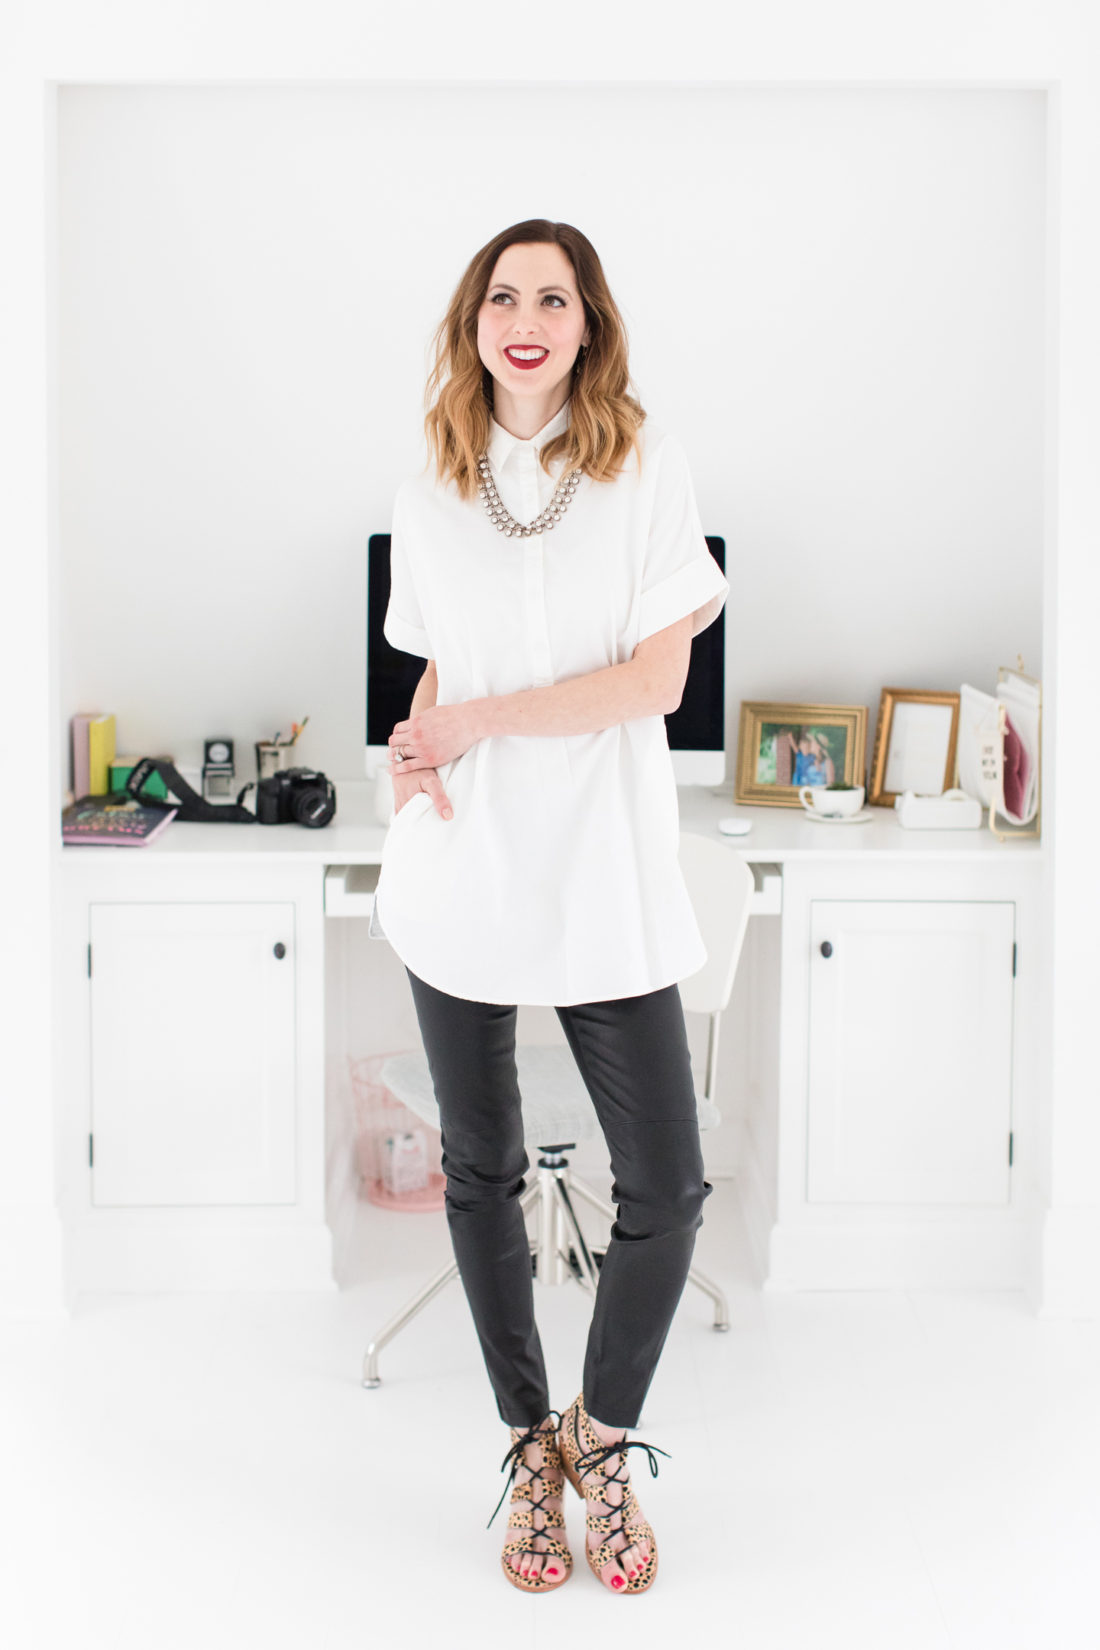 Eva Amurri Martino models a postpartum style guide look in her office in Connecticut